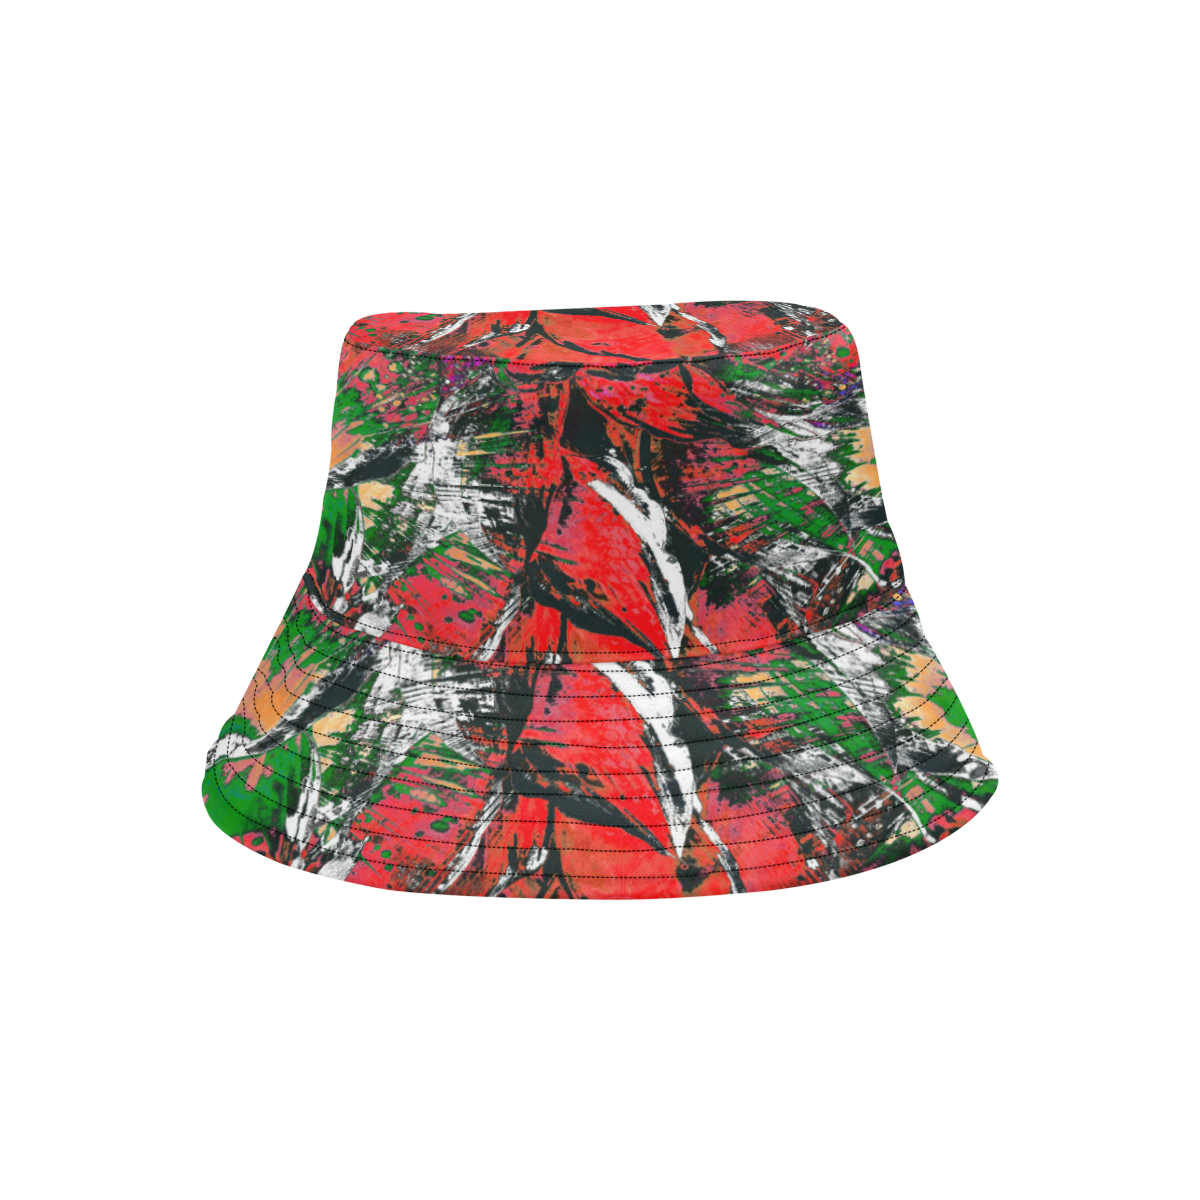 wheelVibe2_8500 46 low All Over Print Bucket Hat for Men